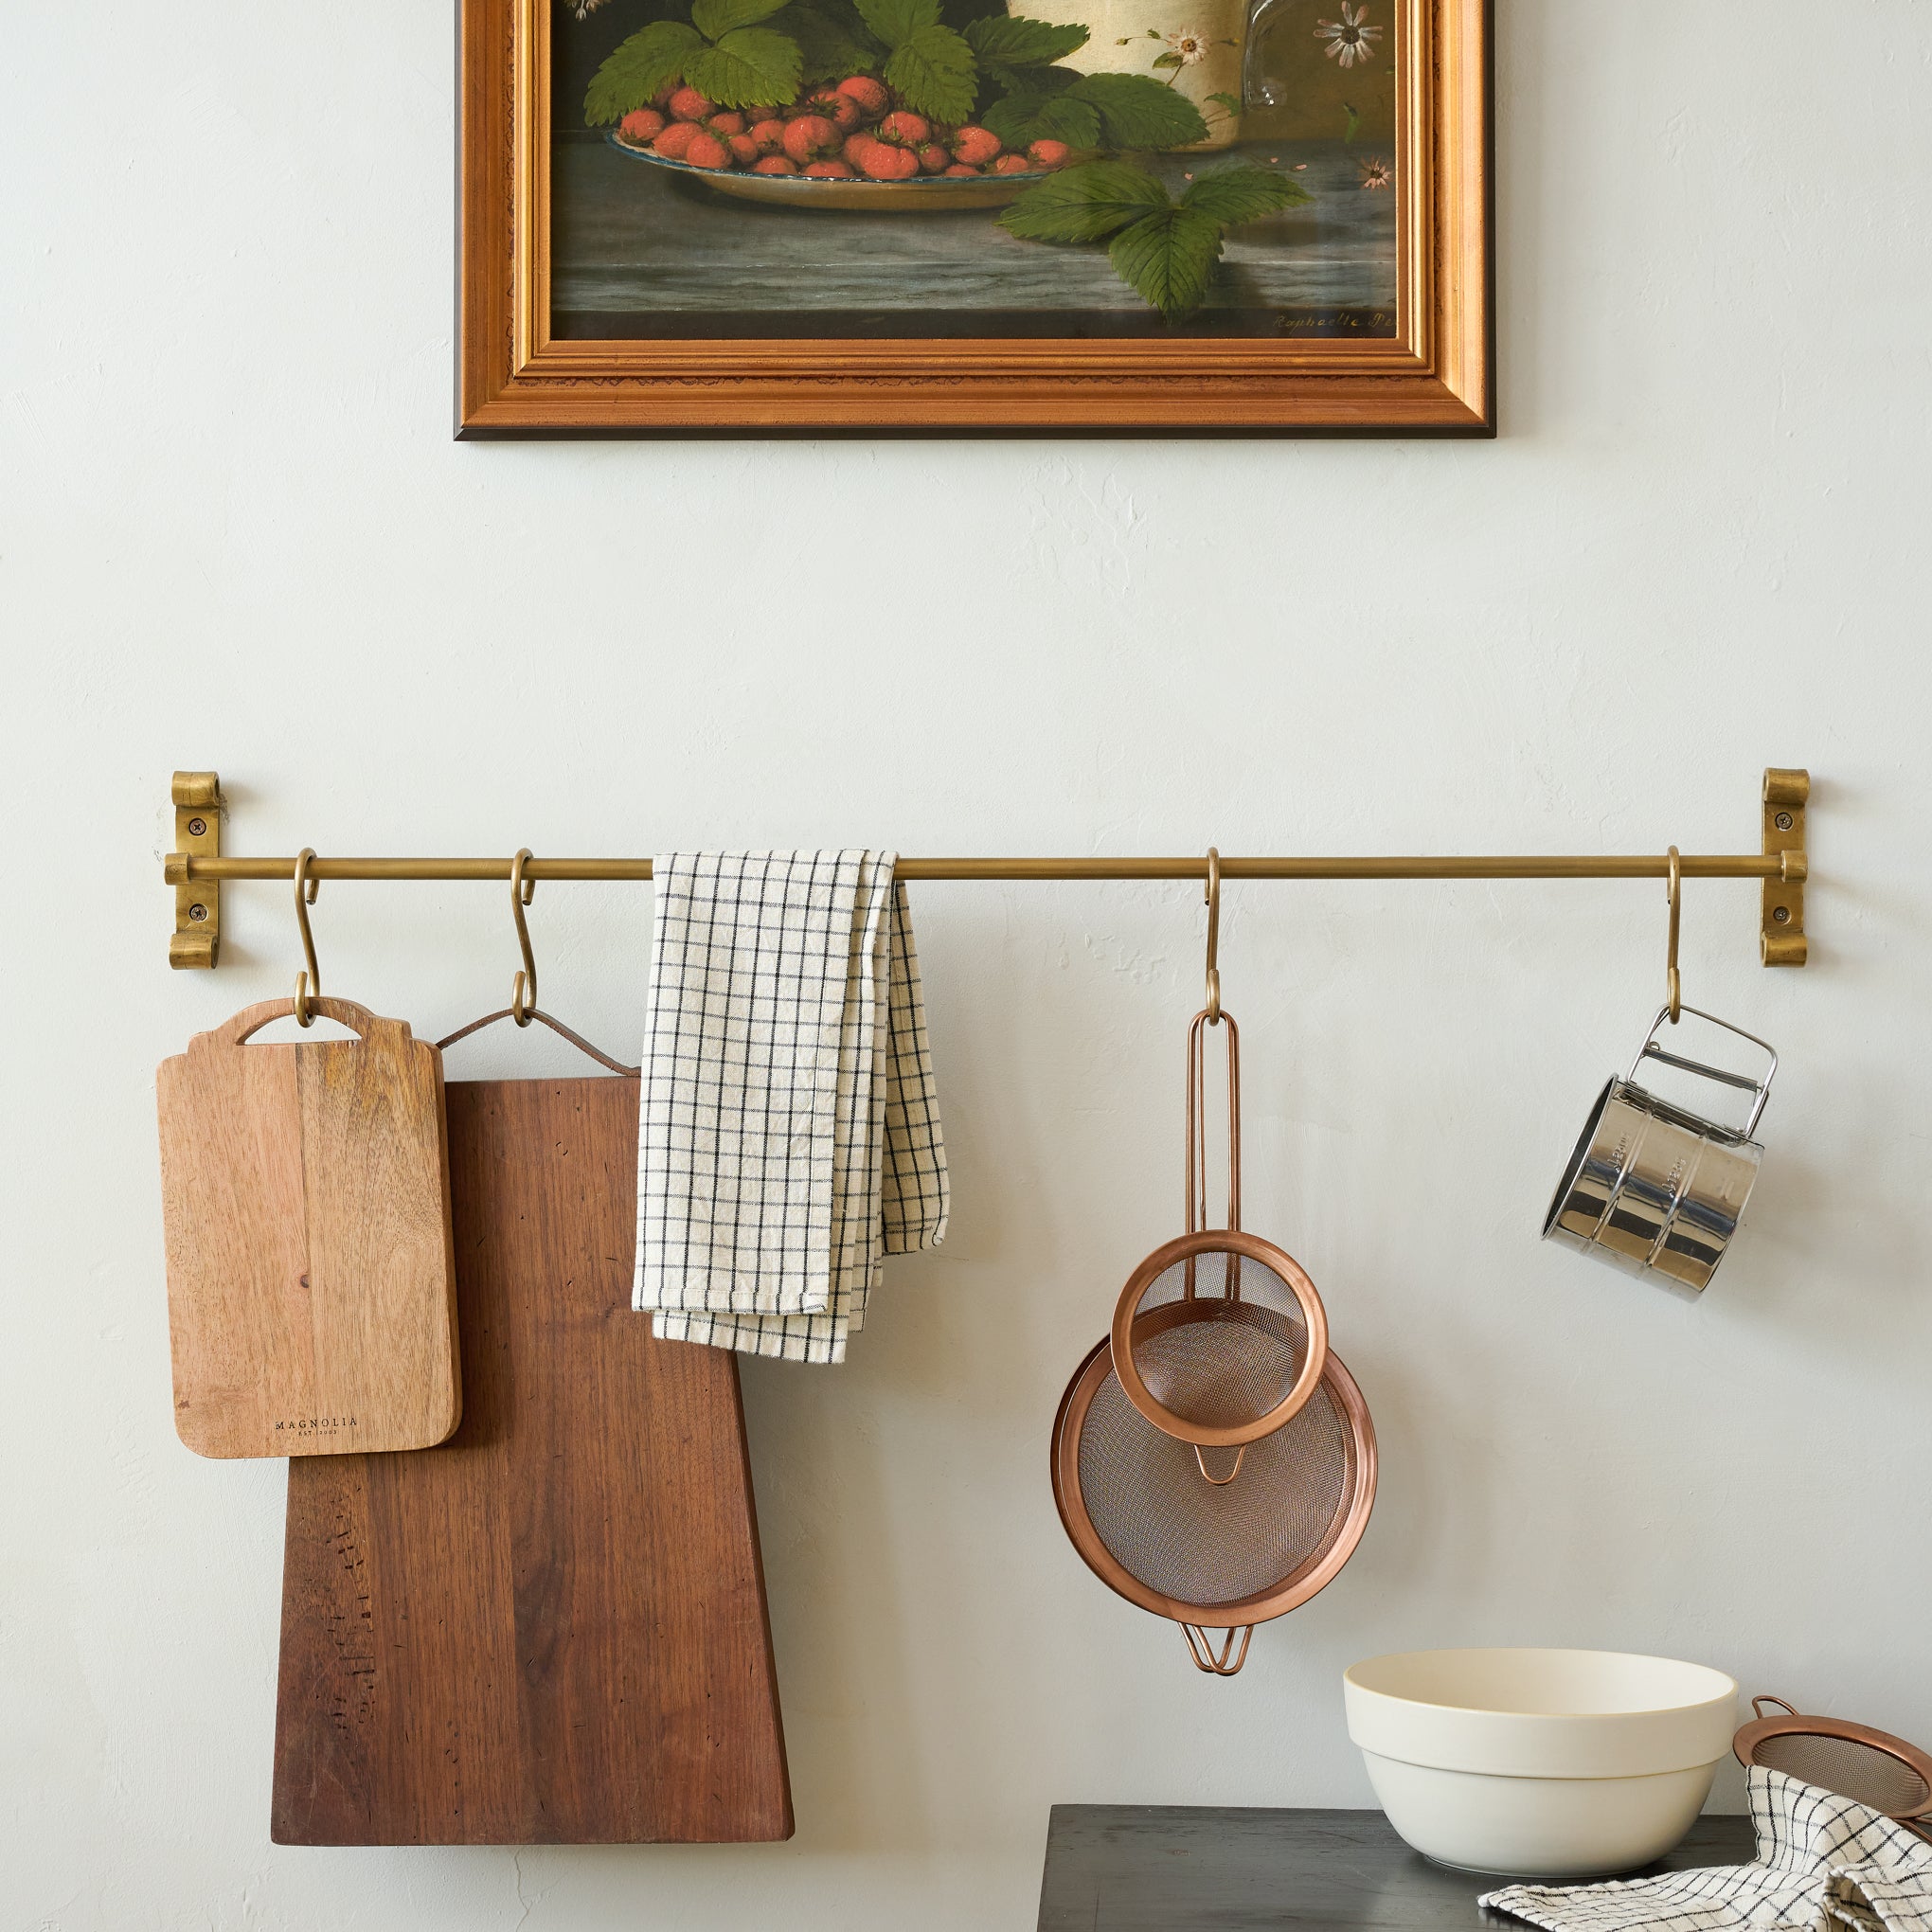 Duke Brass Rail with Hooks with kitchen items hanging on hooks $68.00